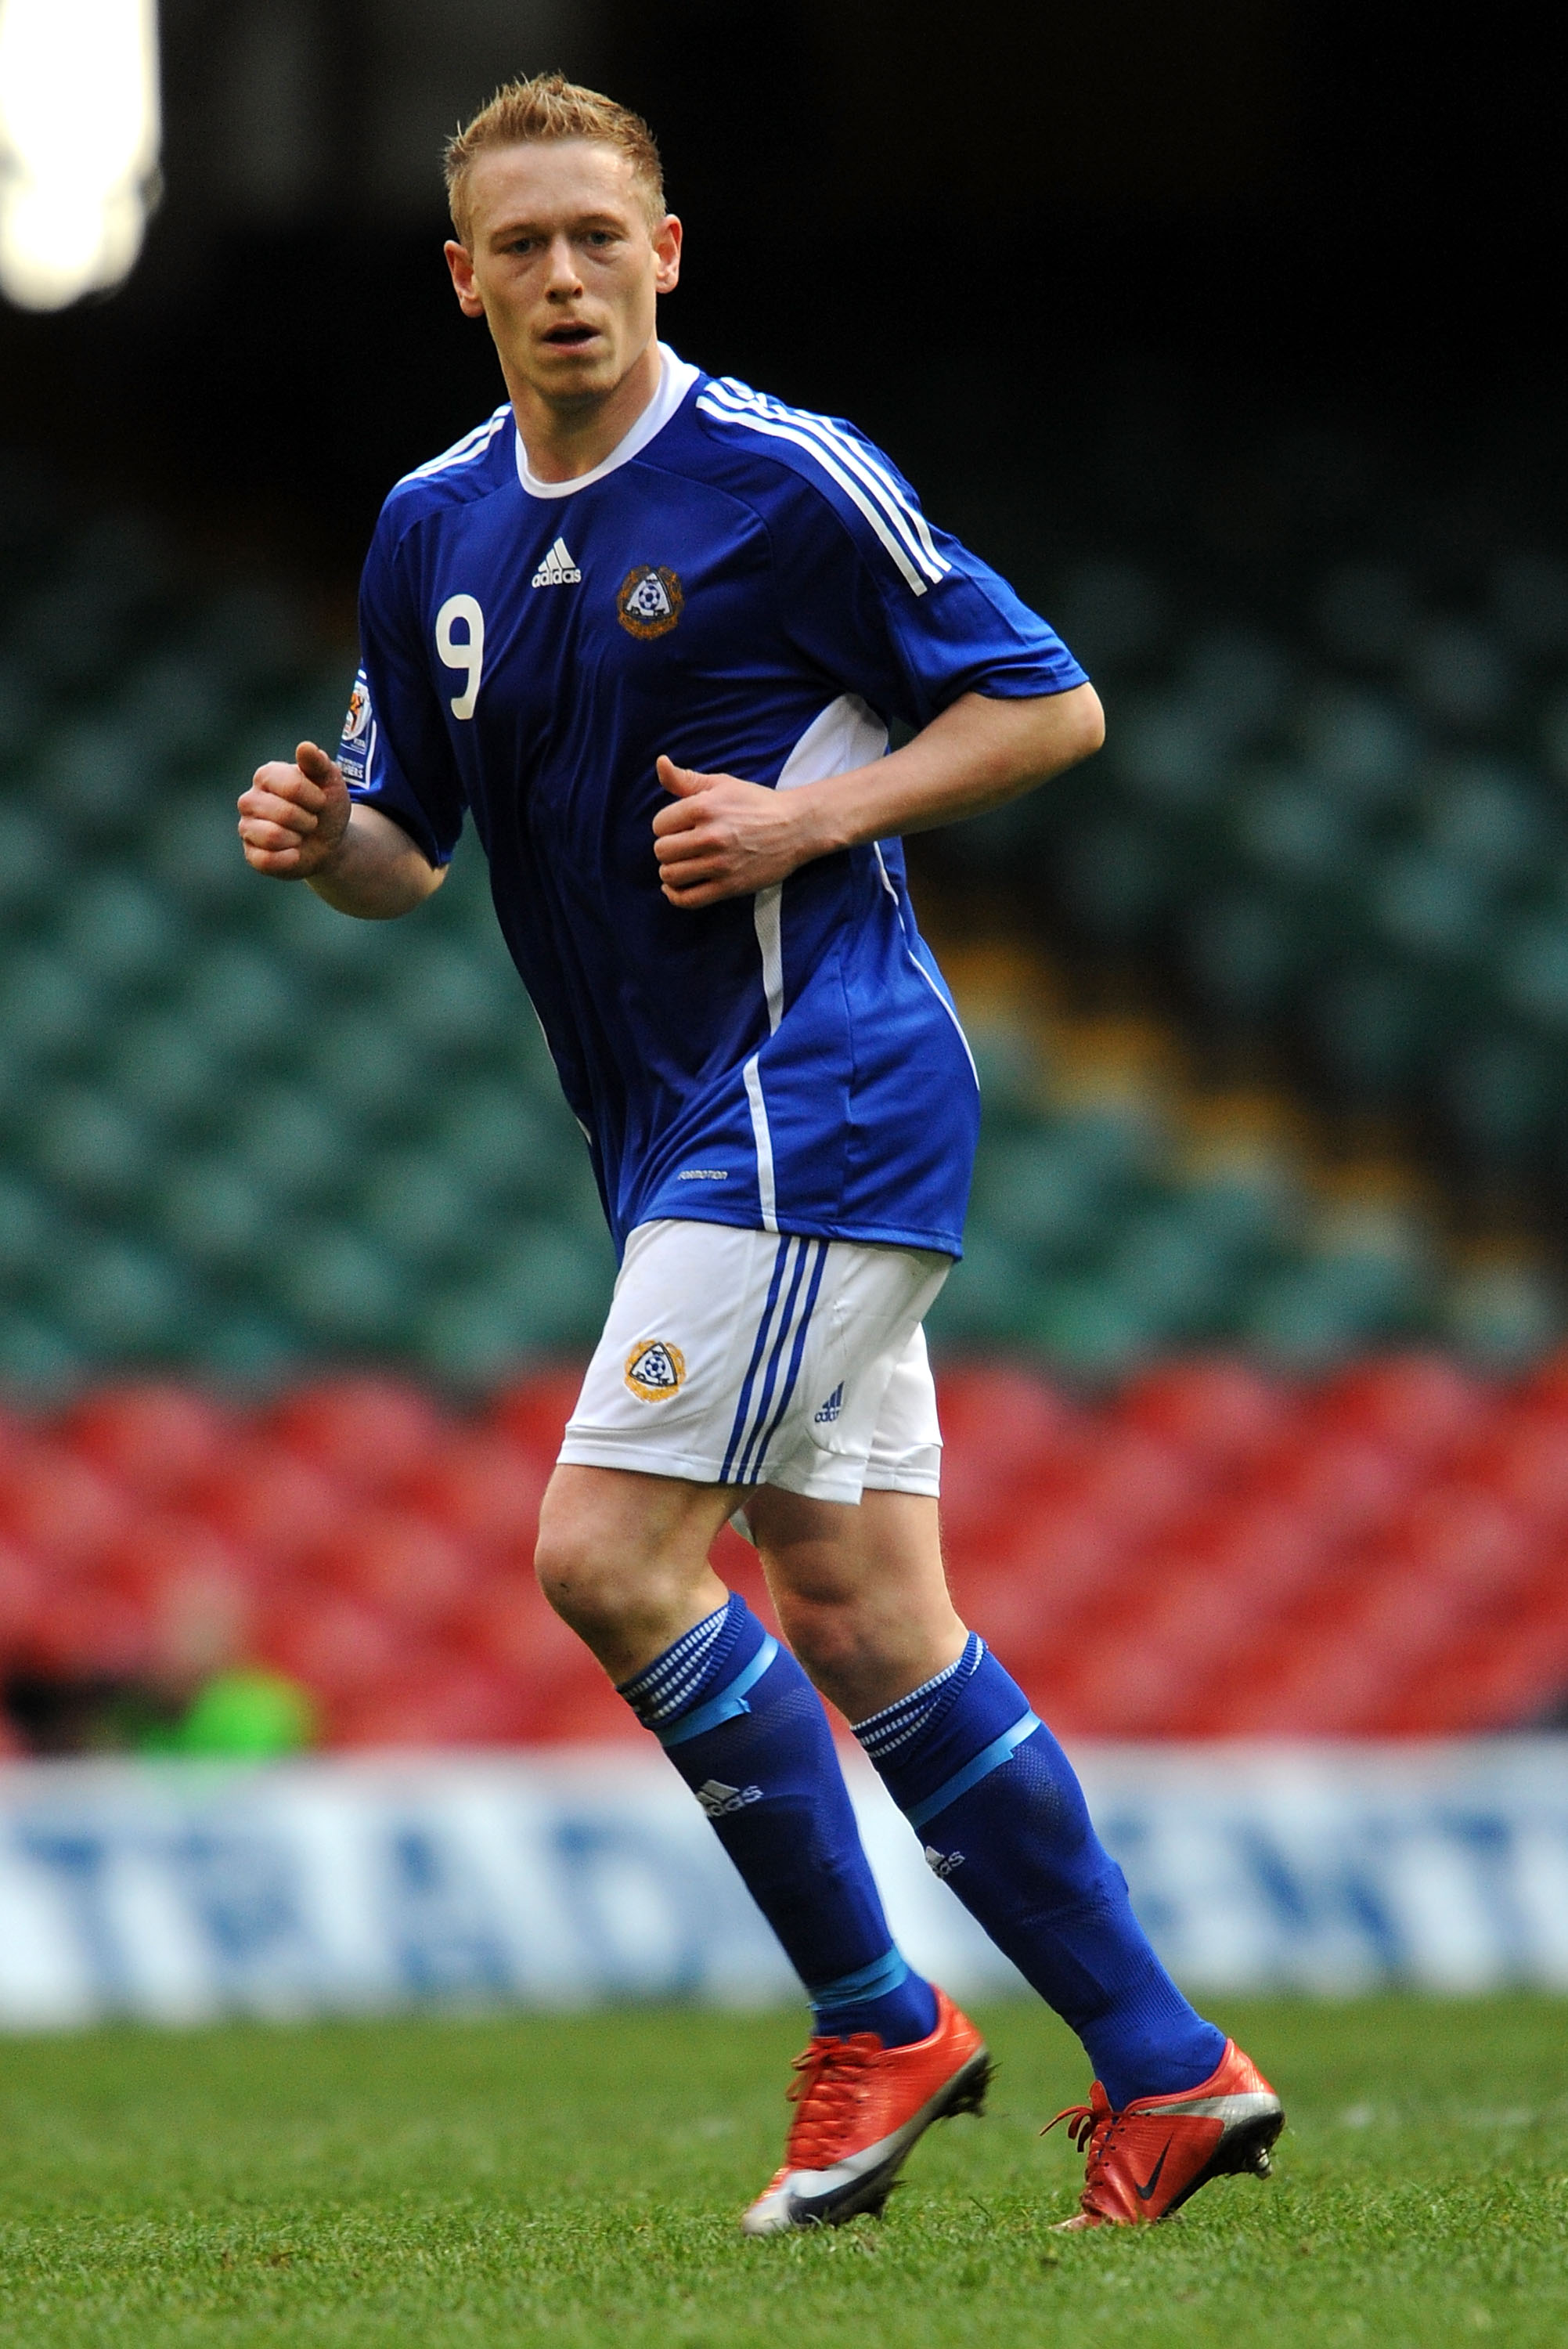 CARDIFF, UNITED KINGDOM - MARCH 28:  Mikael Forssell of Finland in action during the FIFA 2010 World Cup Qualifier Group 4 match between Wales and Finland at the Millennium Stadium on March 28, 2009 in Cardiff, Wales.  (Photo by Christopher Lee/Getty Imag